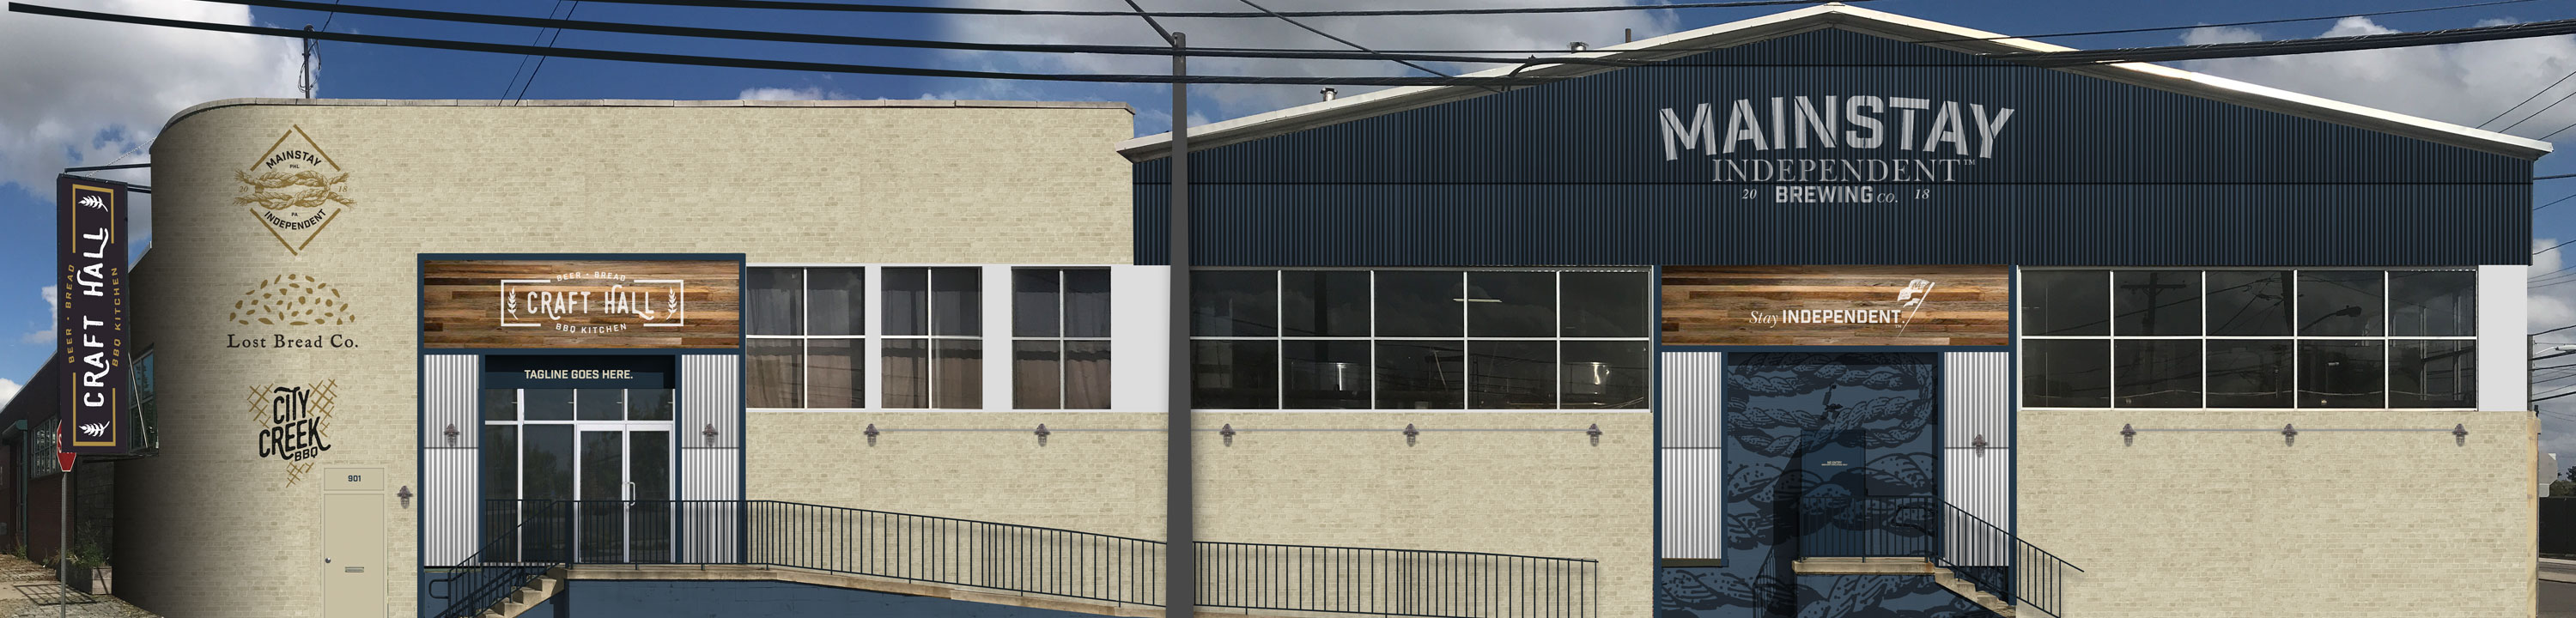 Mainstay Independent Brewing Company Exterior Design